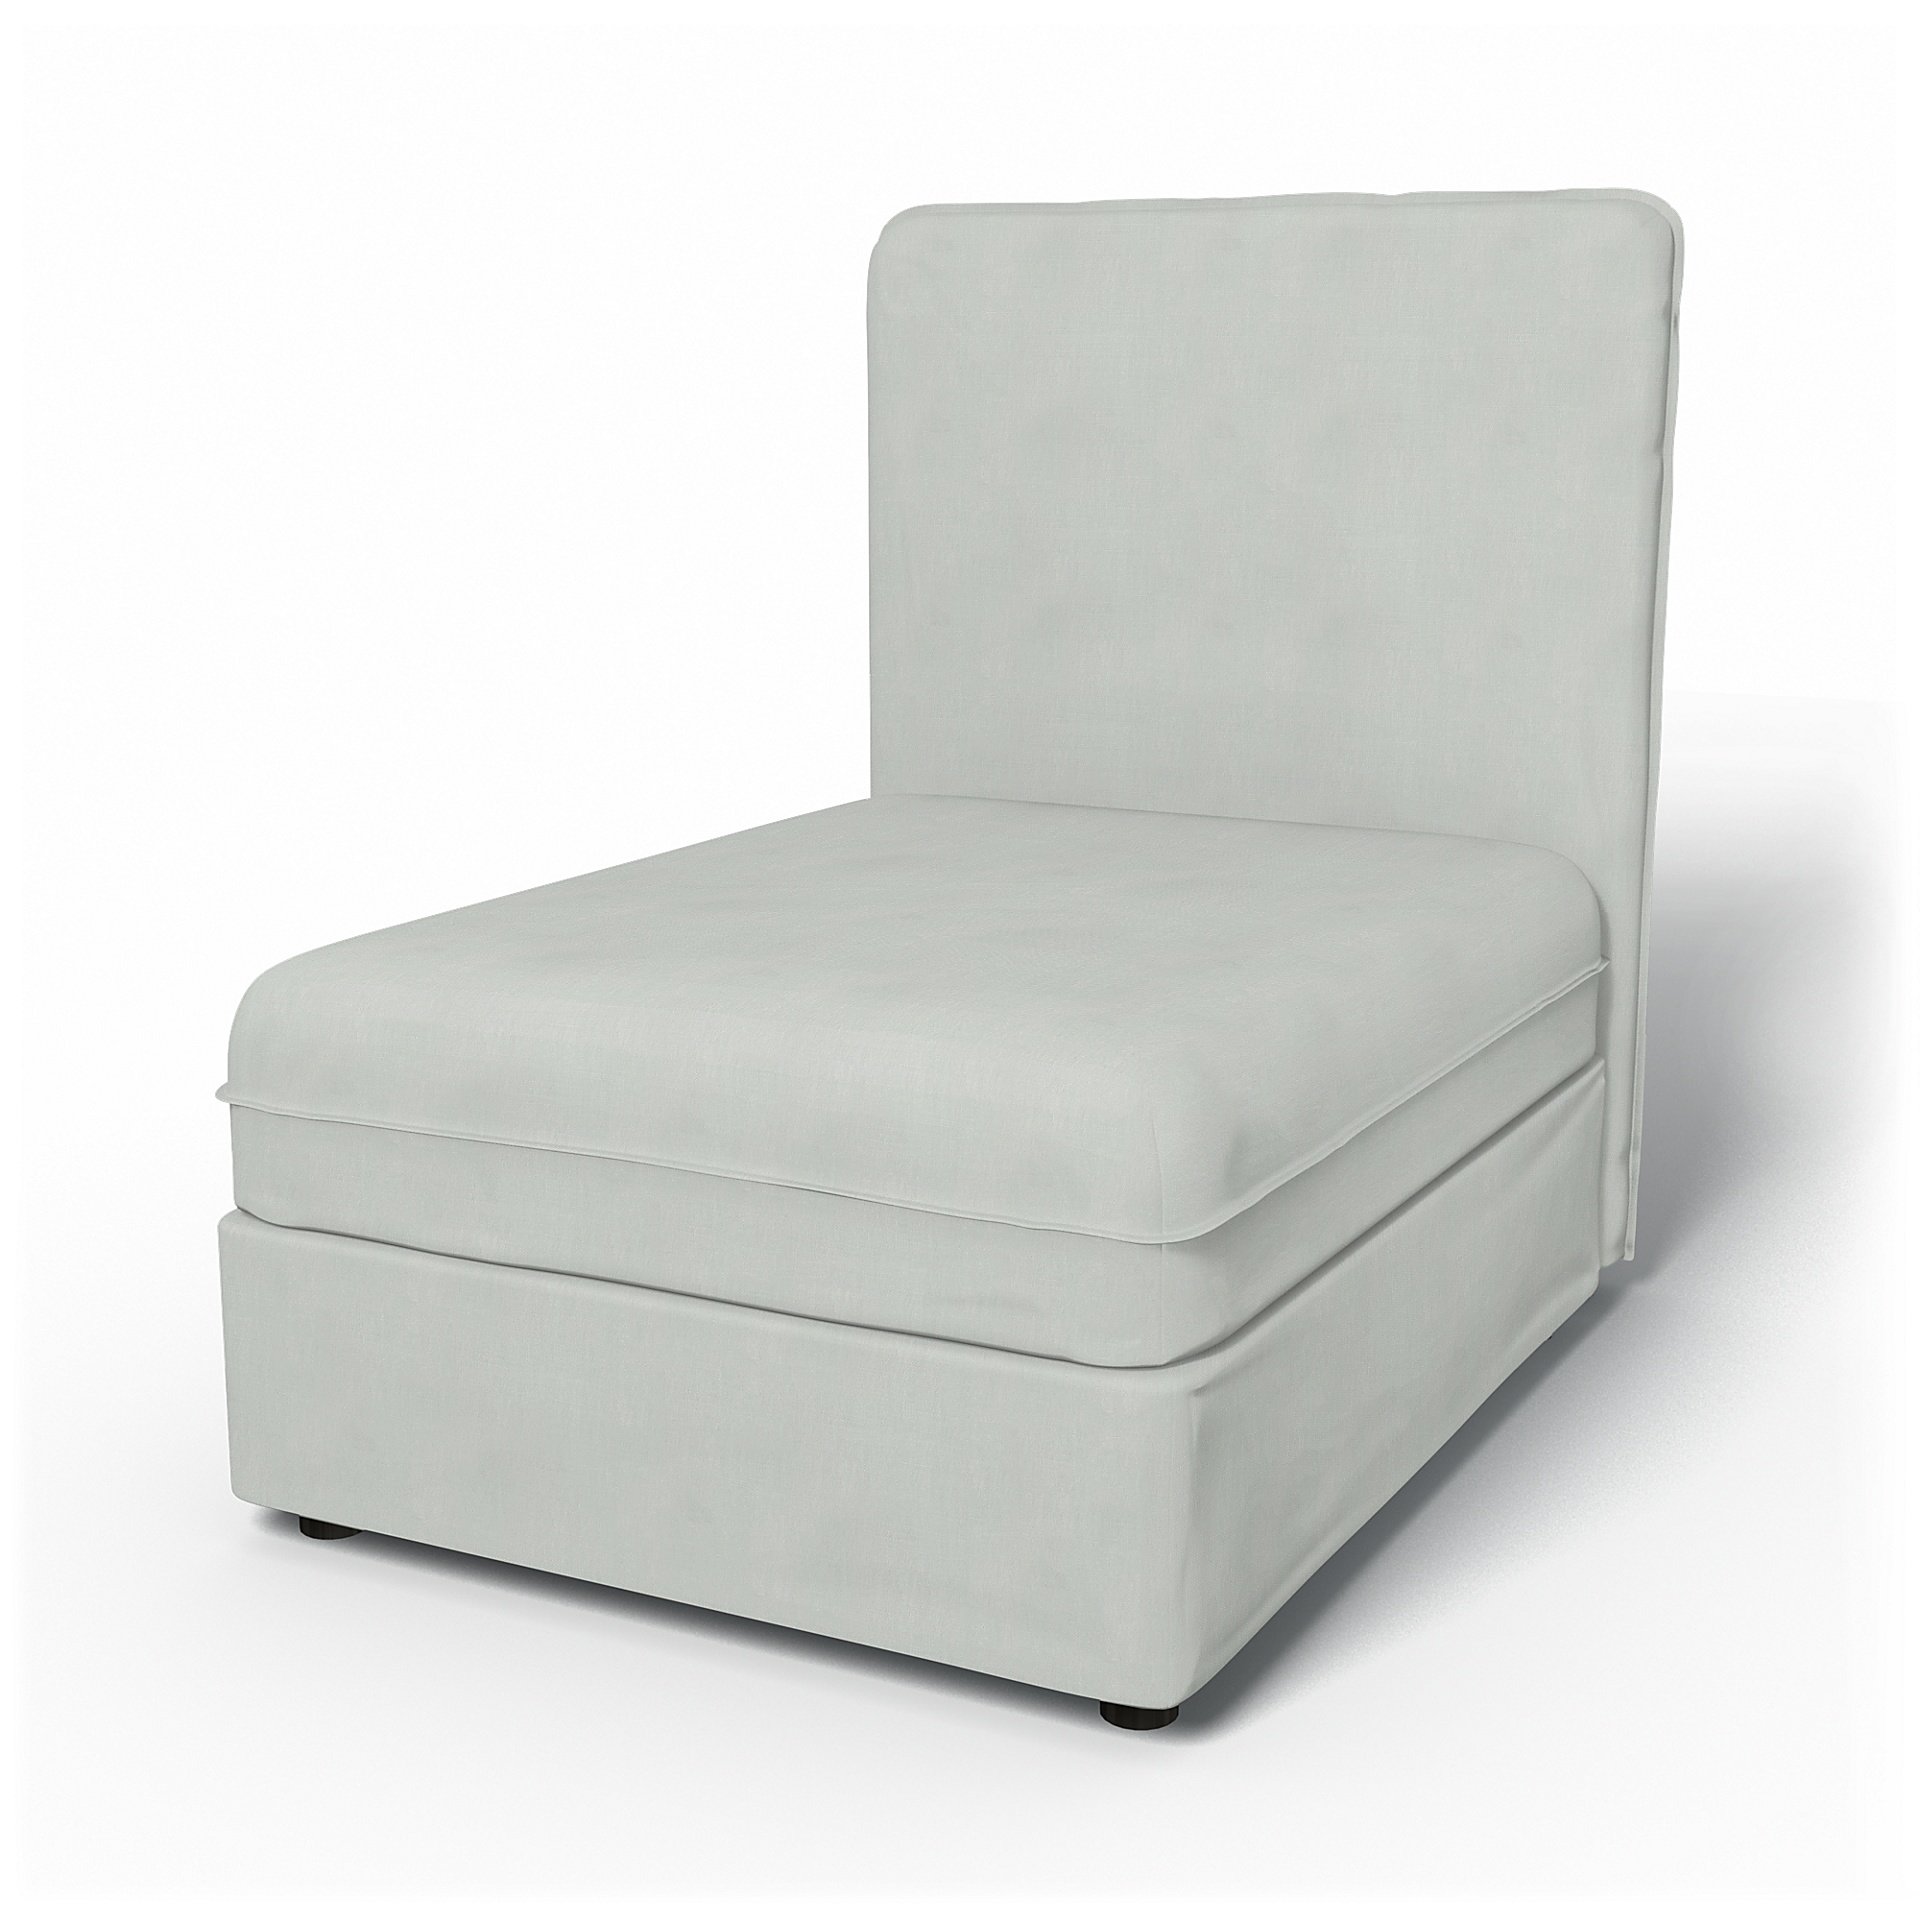 IKEA - Vallentuna Seat Module with High Back Cover 80x100cm 32x32in, Silver Grey, Linen - Bemz